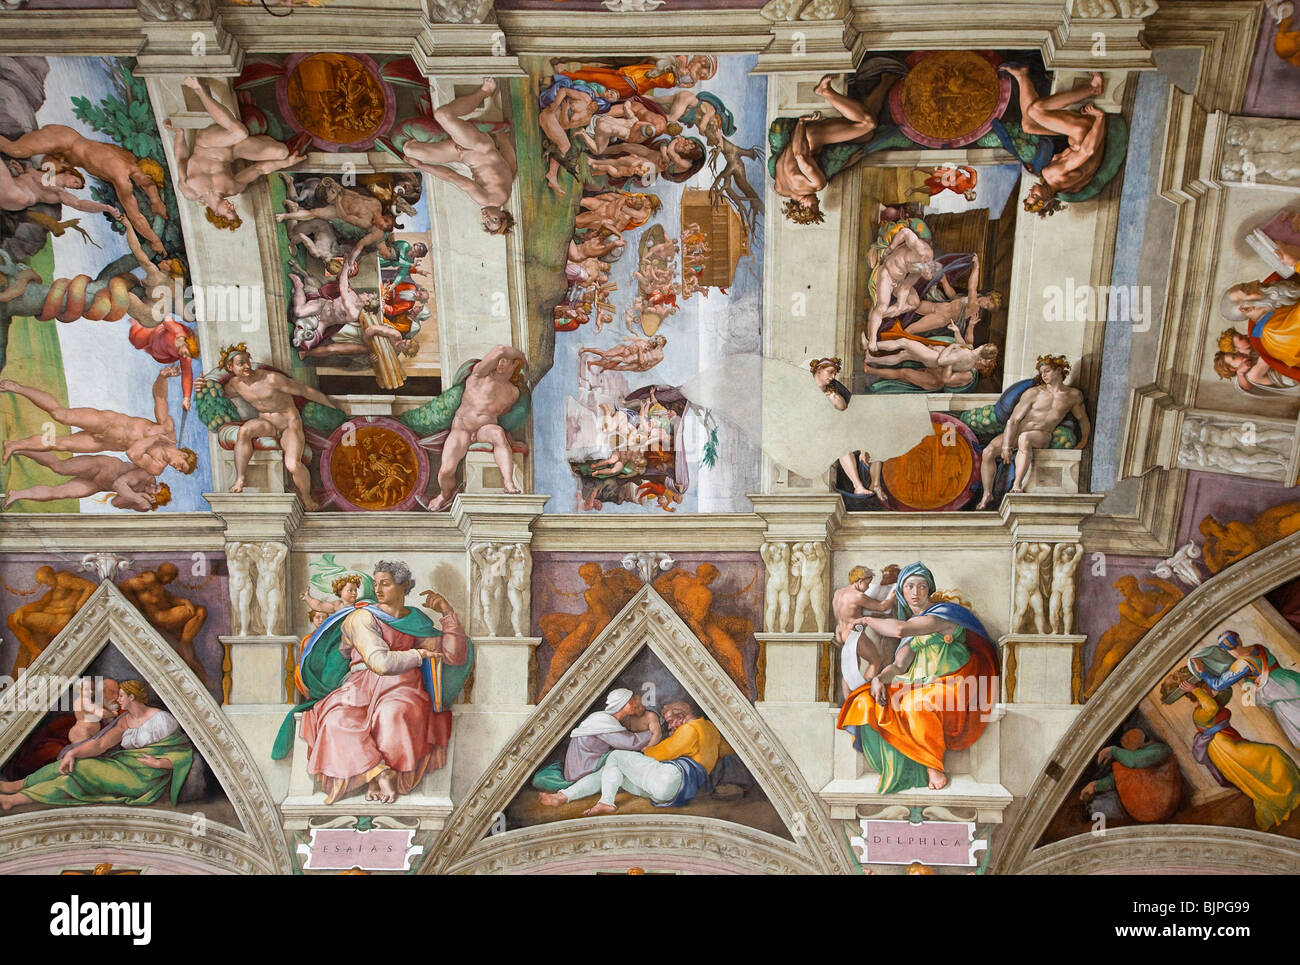 Rome Vatican City Vatican Museums Sistine Chapel Ceiling By